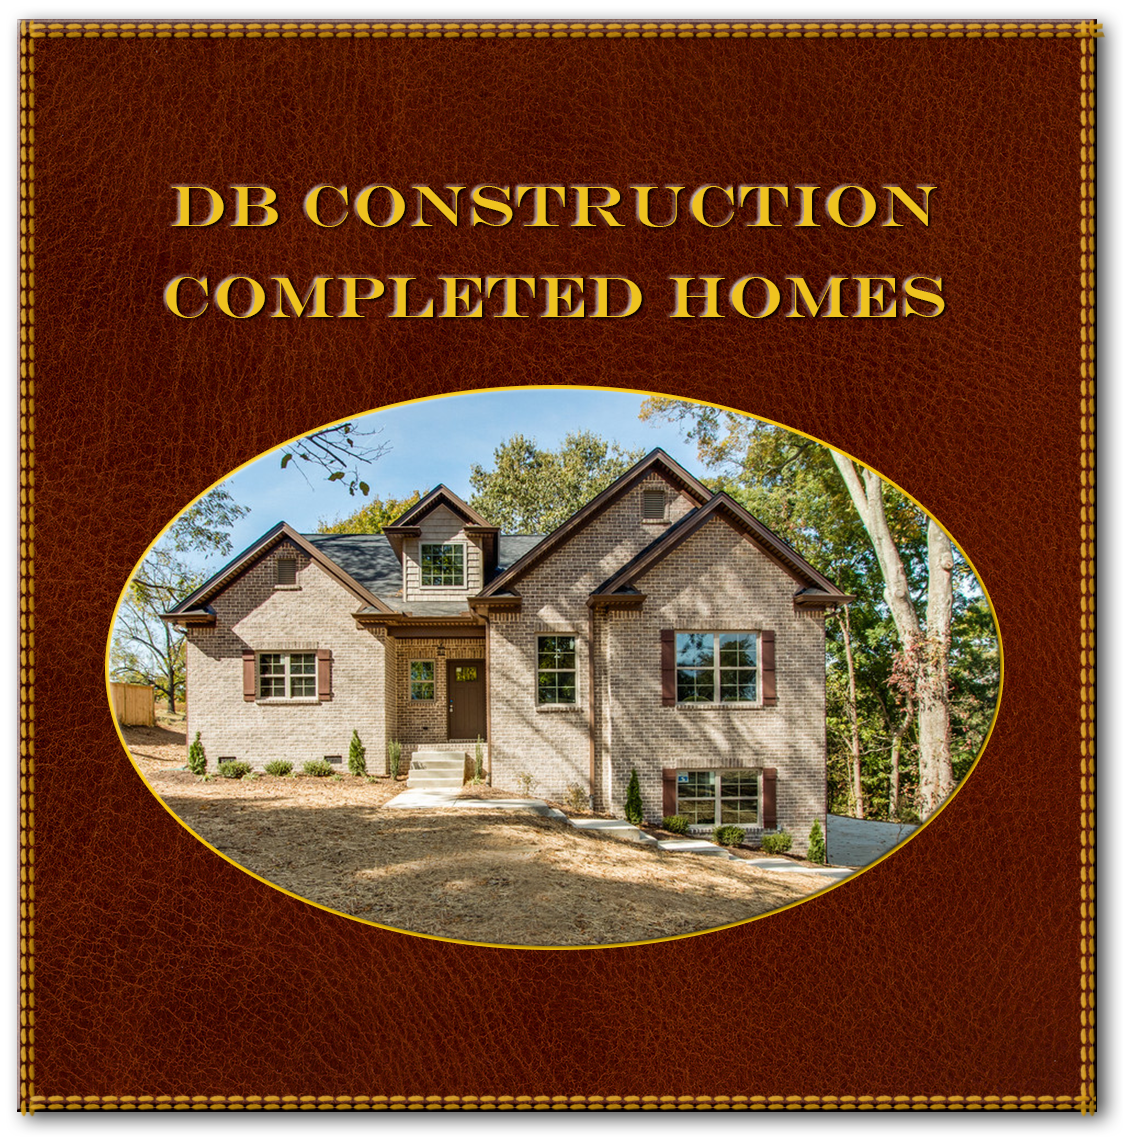 DB Construction Recently Completed Homes